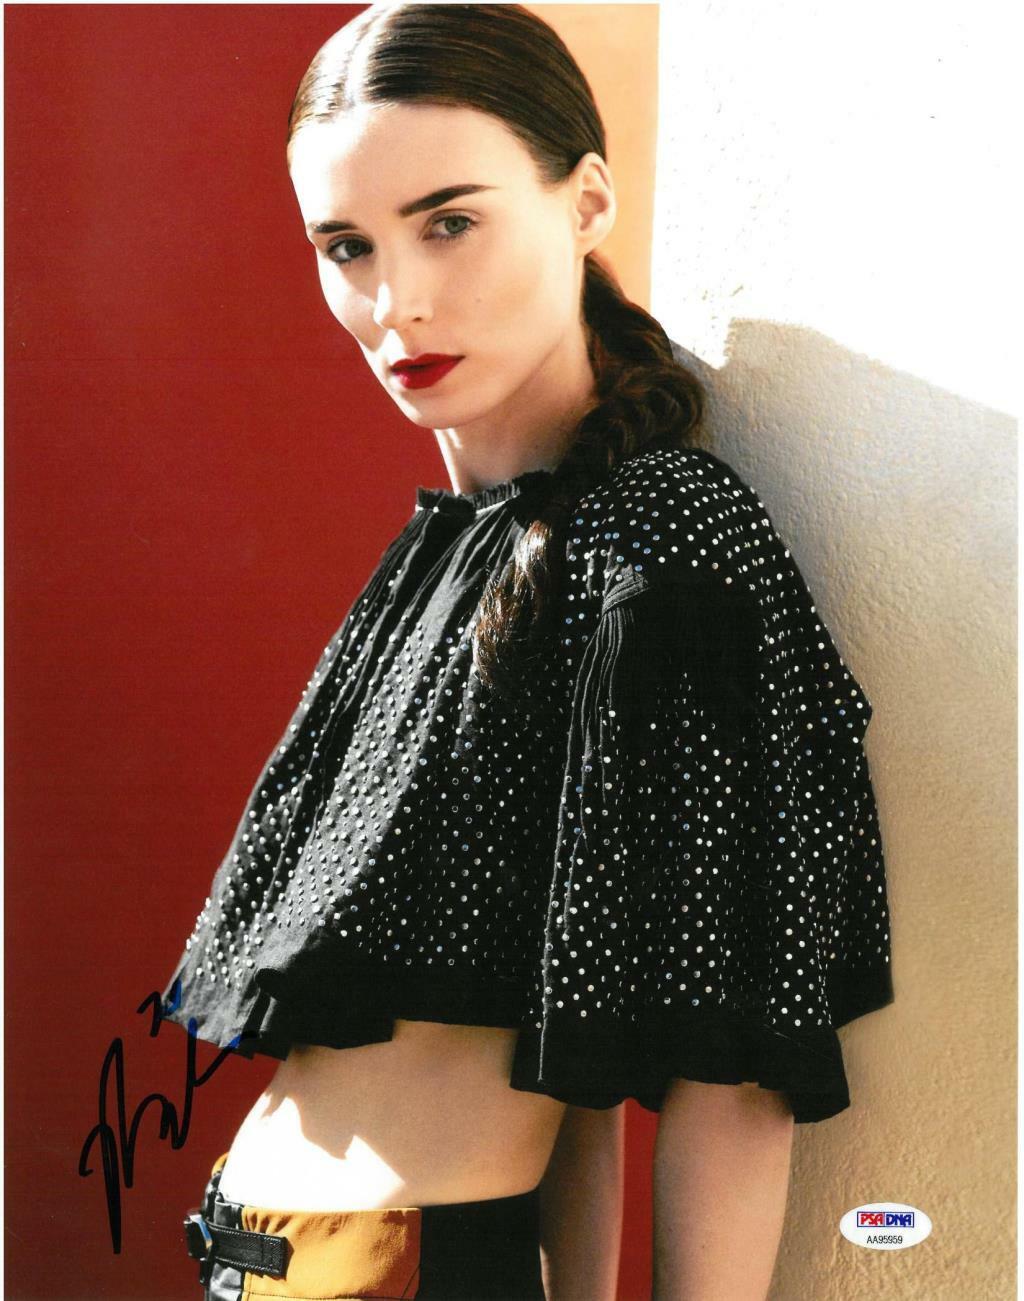 Rooney Mara Signed Authentic Autographed 11x14 Photo Poster painting PSA/DNA #AA95959